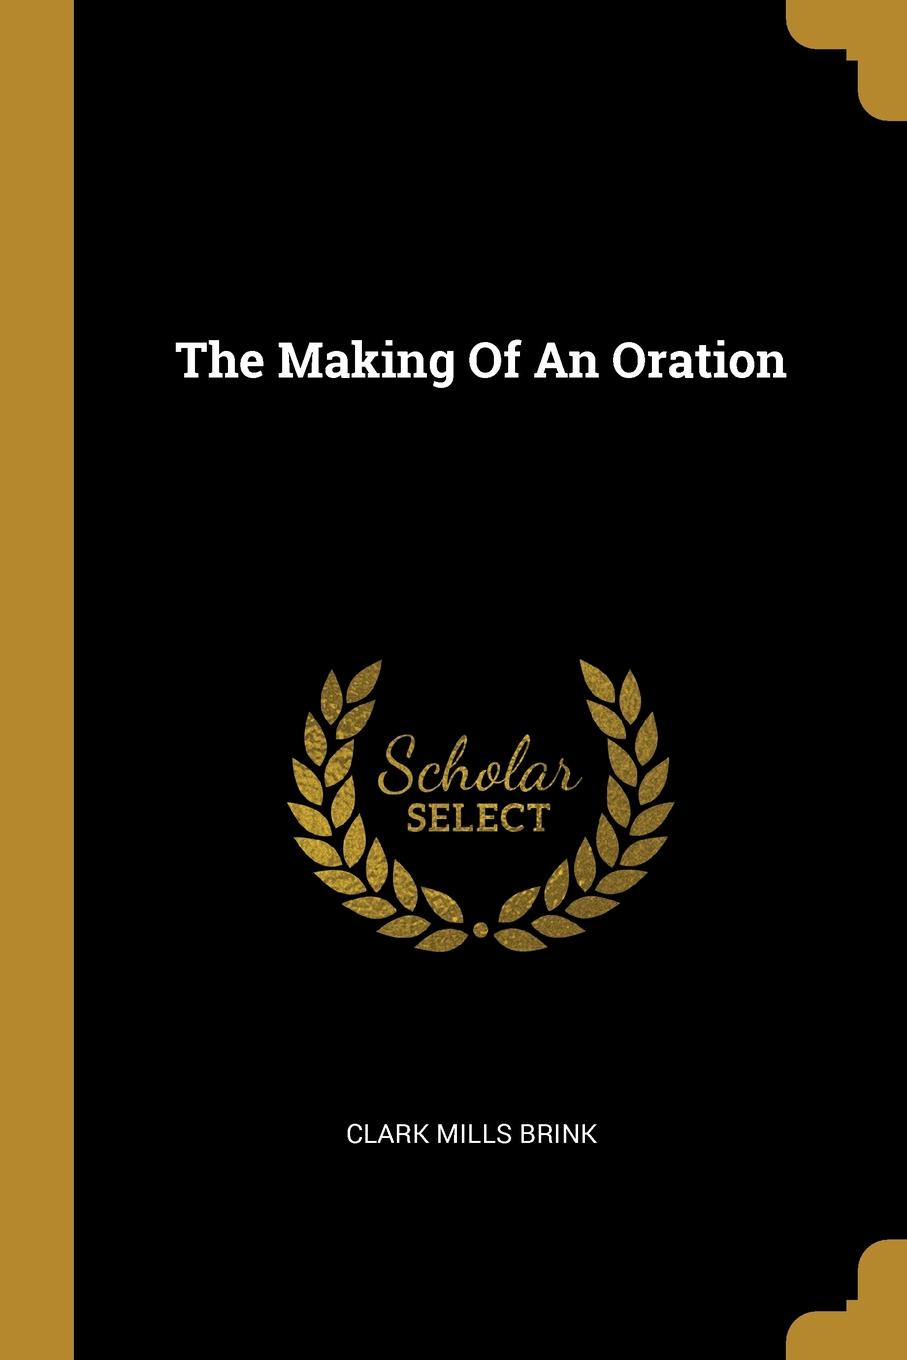 The Making Of An Oration